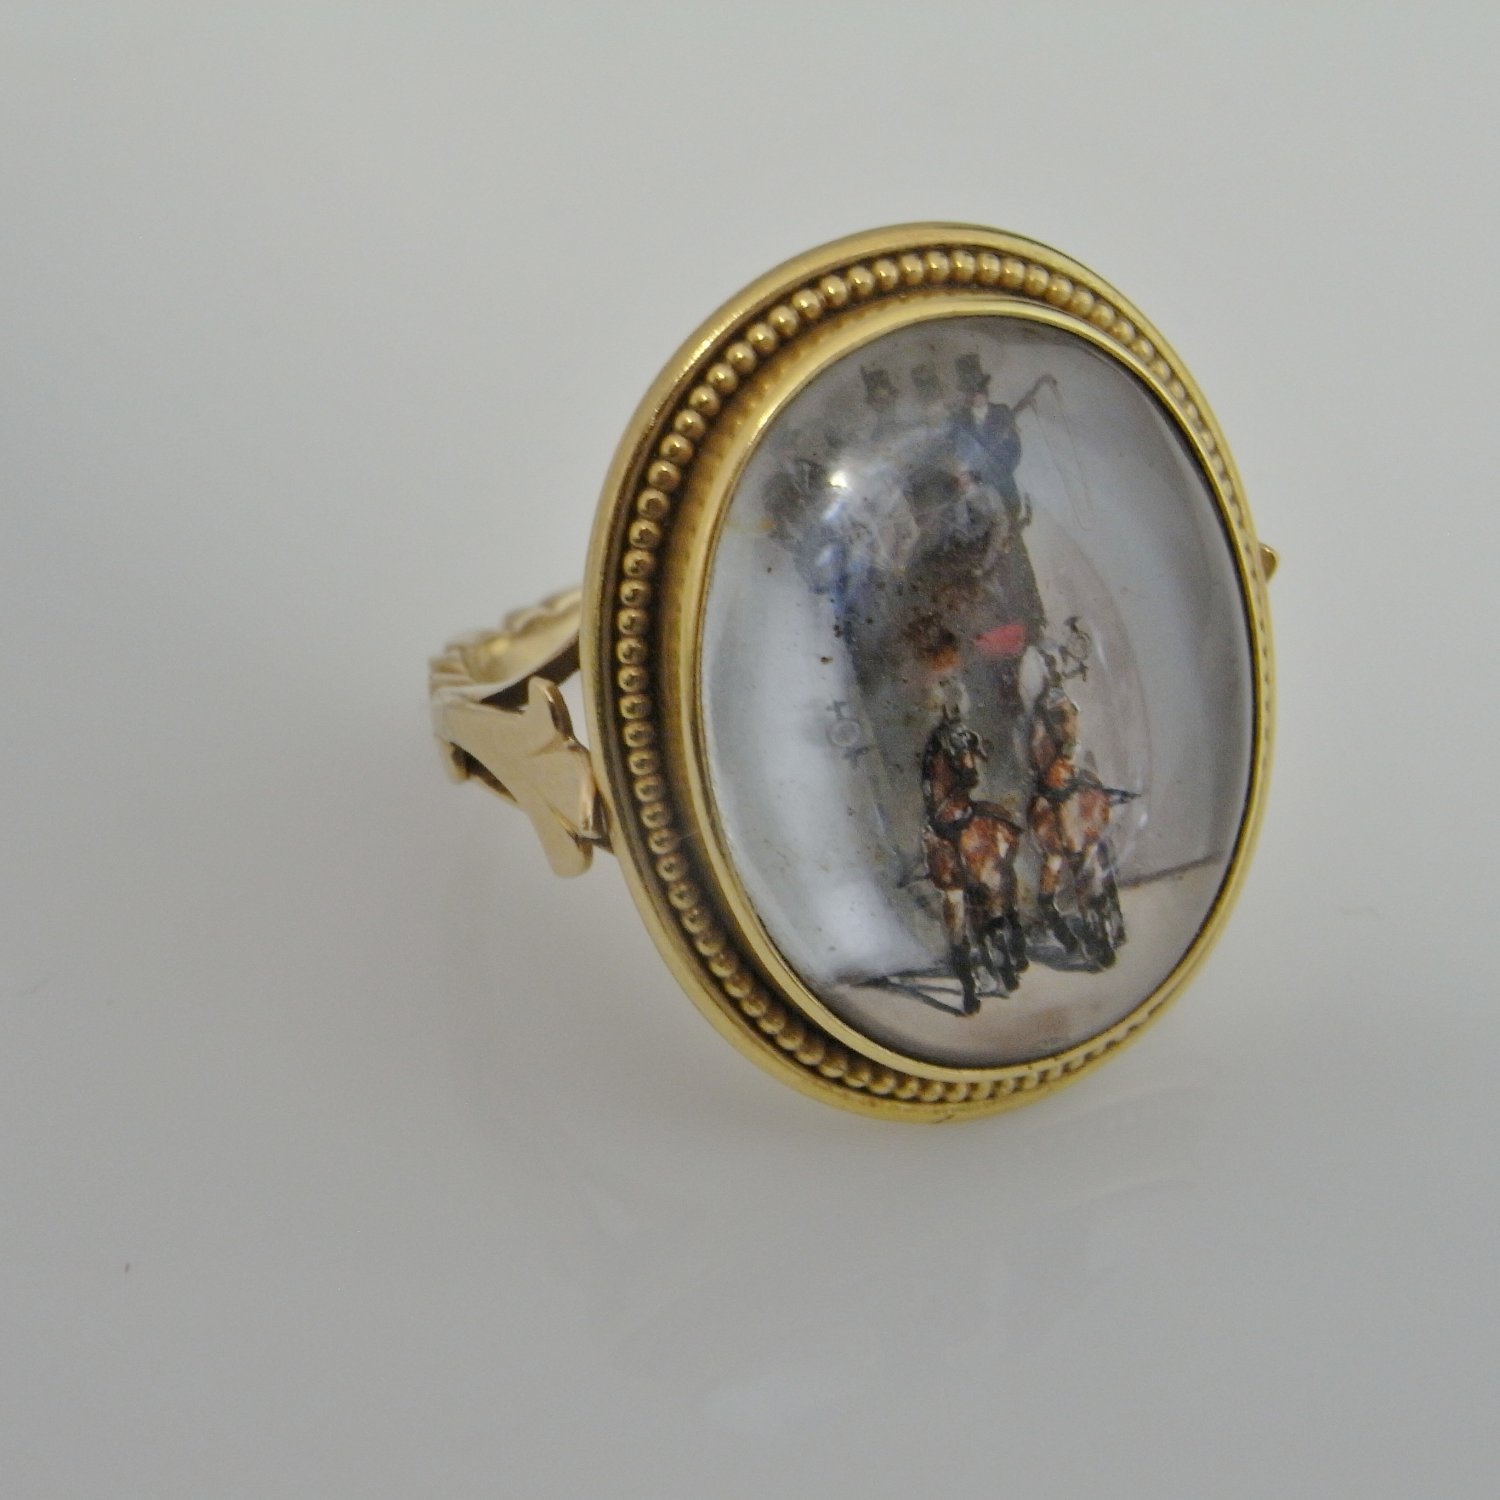 Victorian Essex Crystal Intaglio Ring Miniature Paintings 18K Yellow Gold Ring Georgian Jewelry Antique Gold Ring